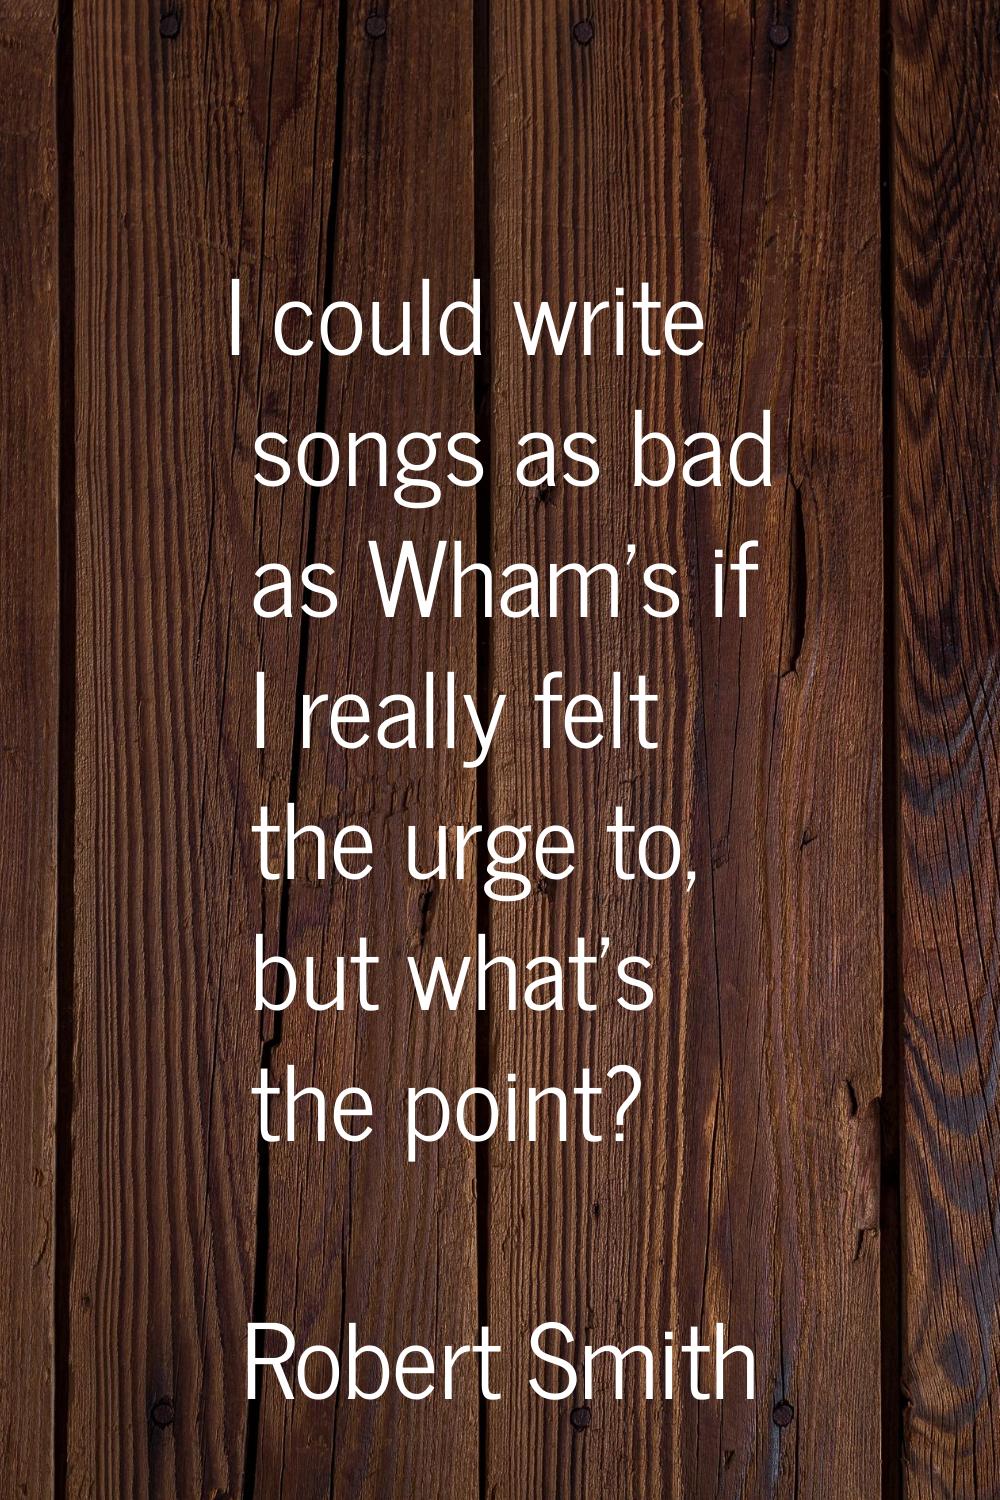 I could write songs as bad as Wham's if I really felt the urge to, but what's the point?